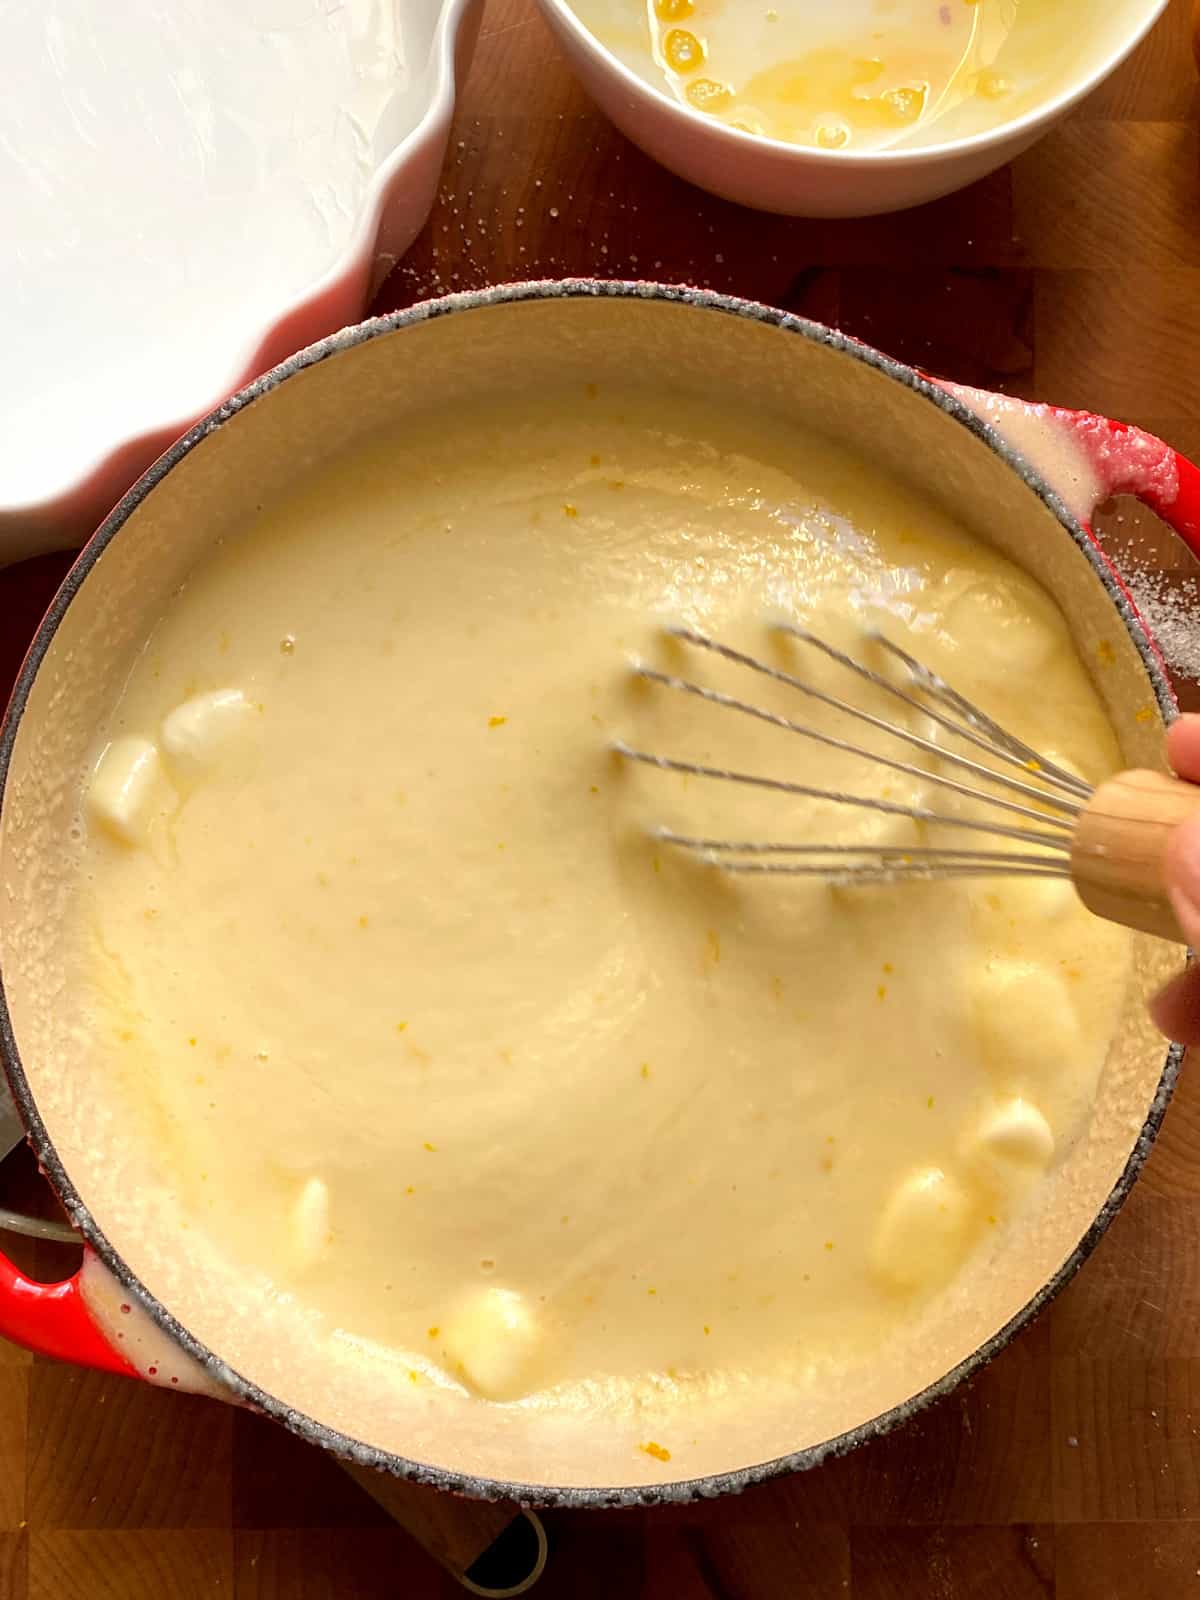 A stock pot on wood, a hand whisking custard with butter, an empty bowl above and partial view of a white tart pan on the left.